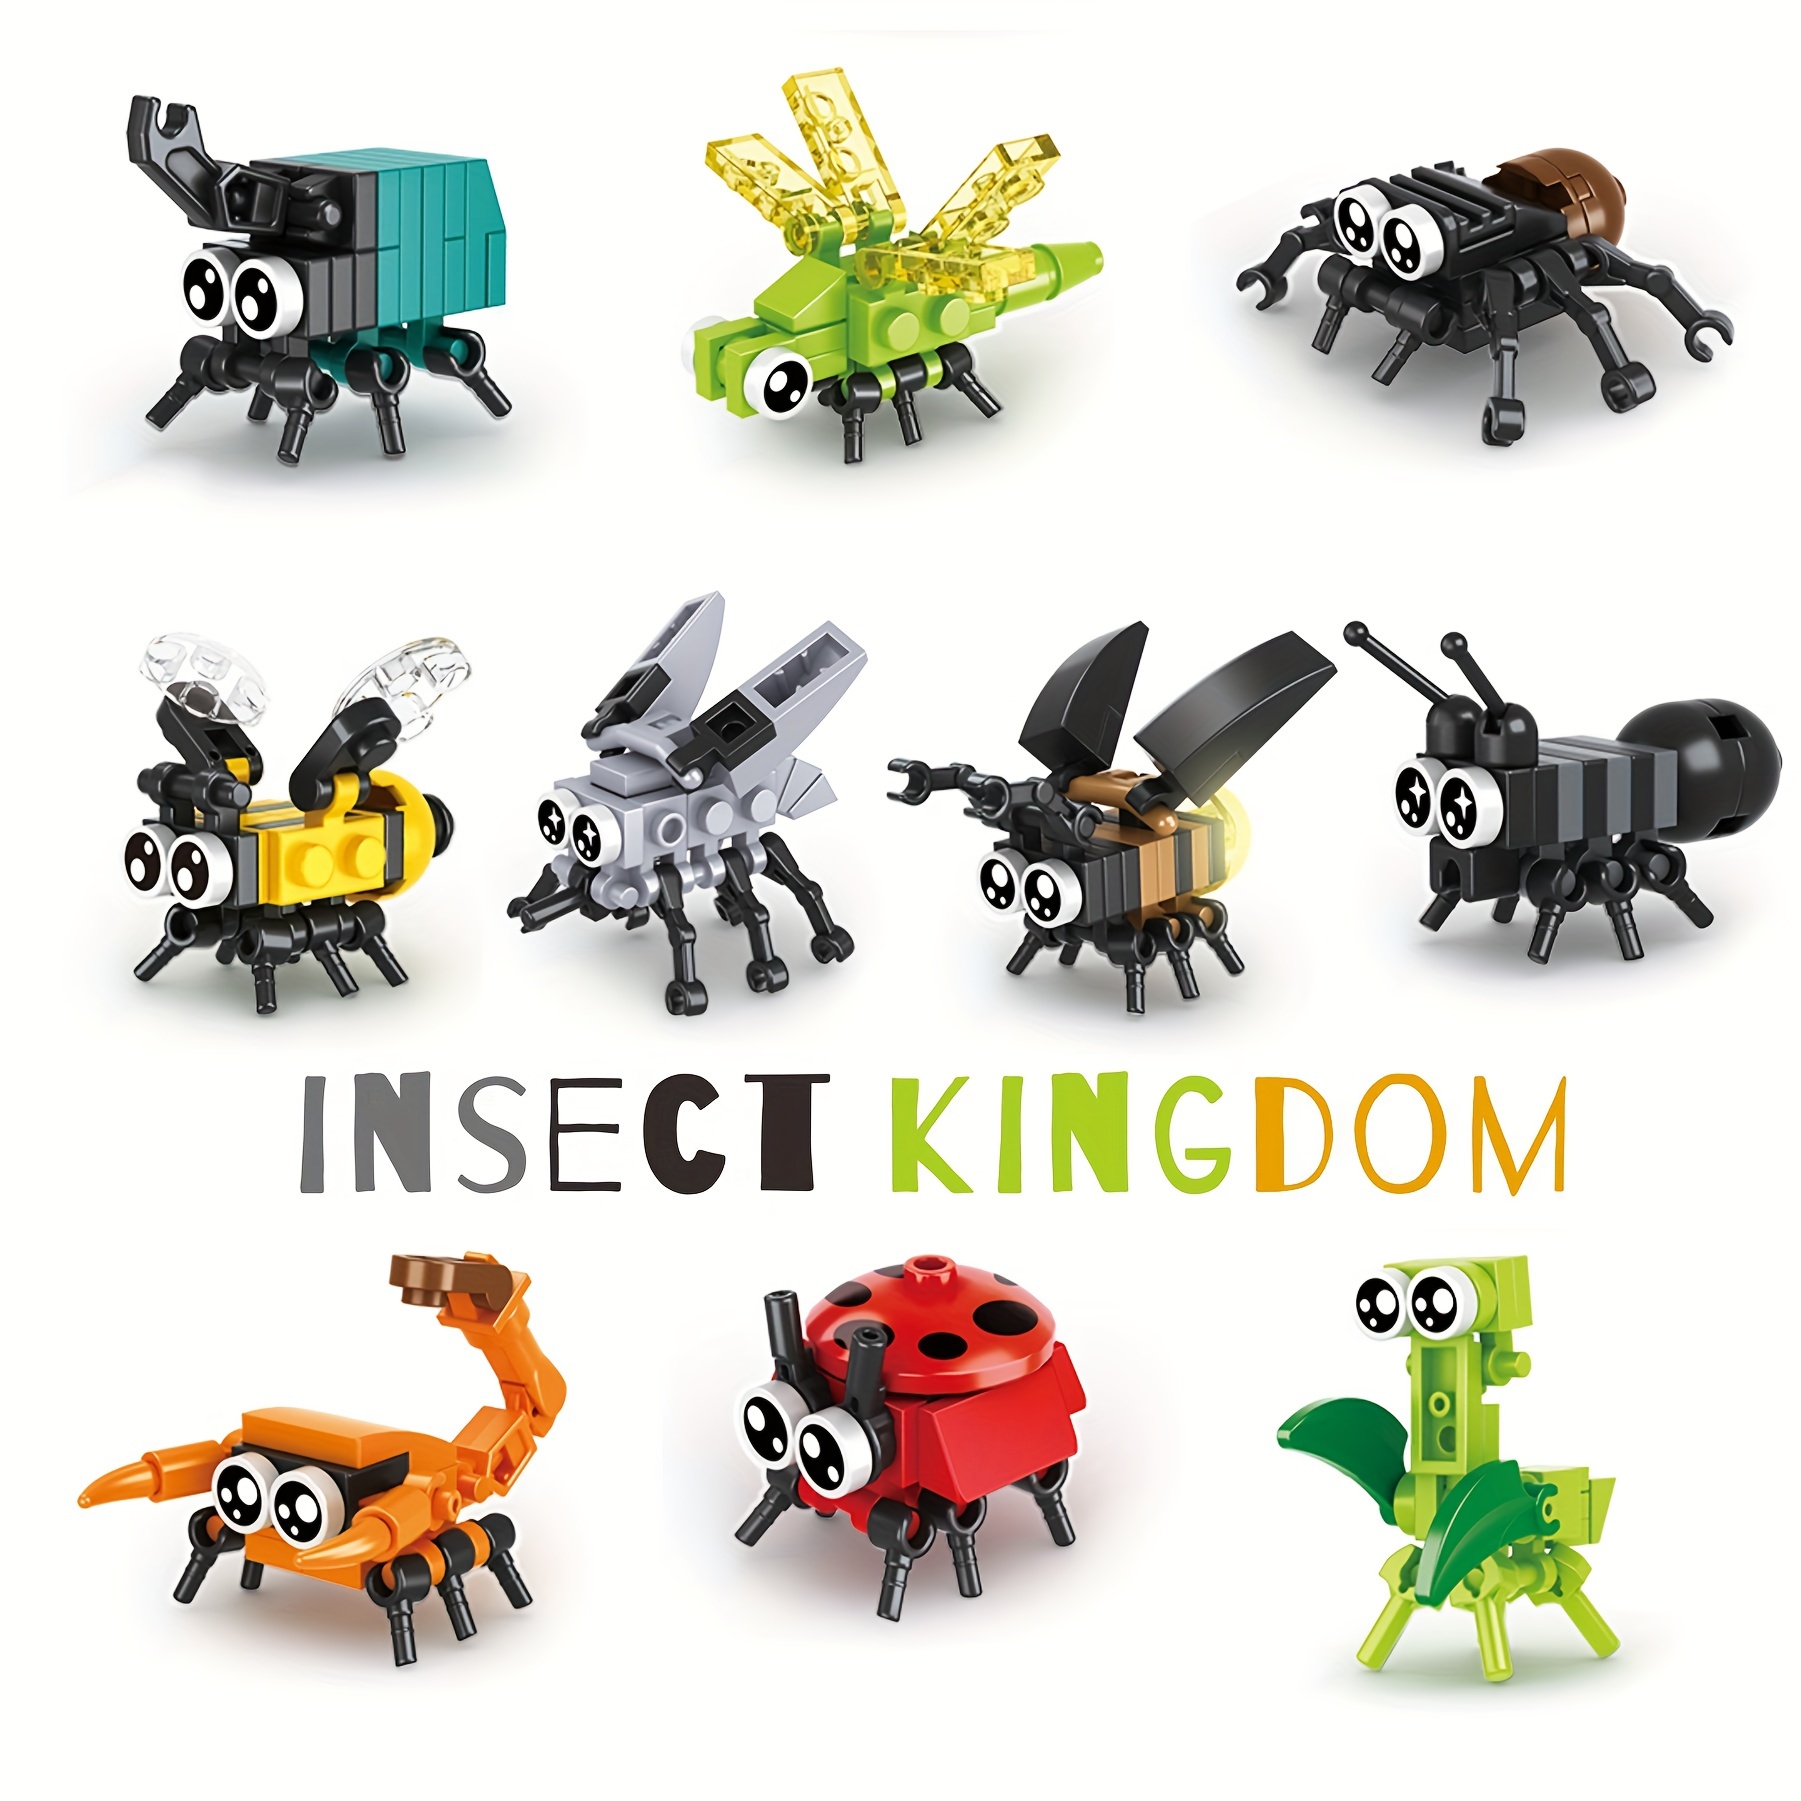 Insect Building Blocks, Insect Model, Different Little Insects Building  Blocks, Bee, Ladybug, Firefly, Dragonfly, Spider Toy For Boy/Girl,  Children's